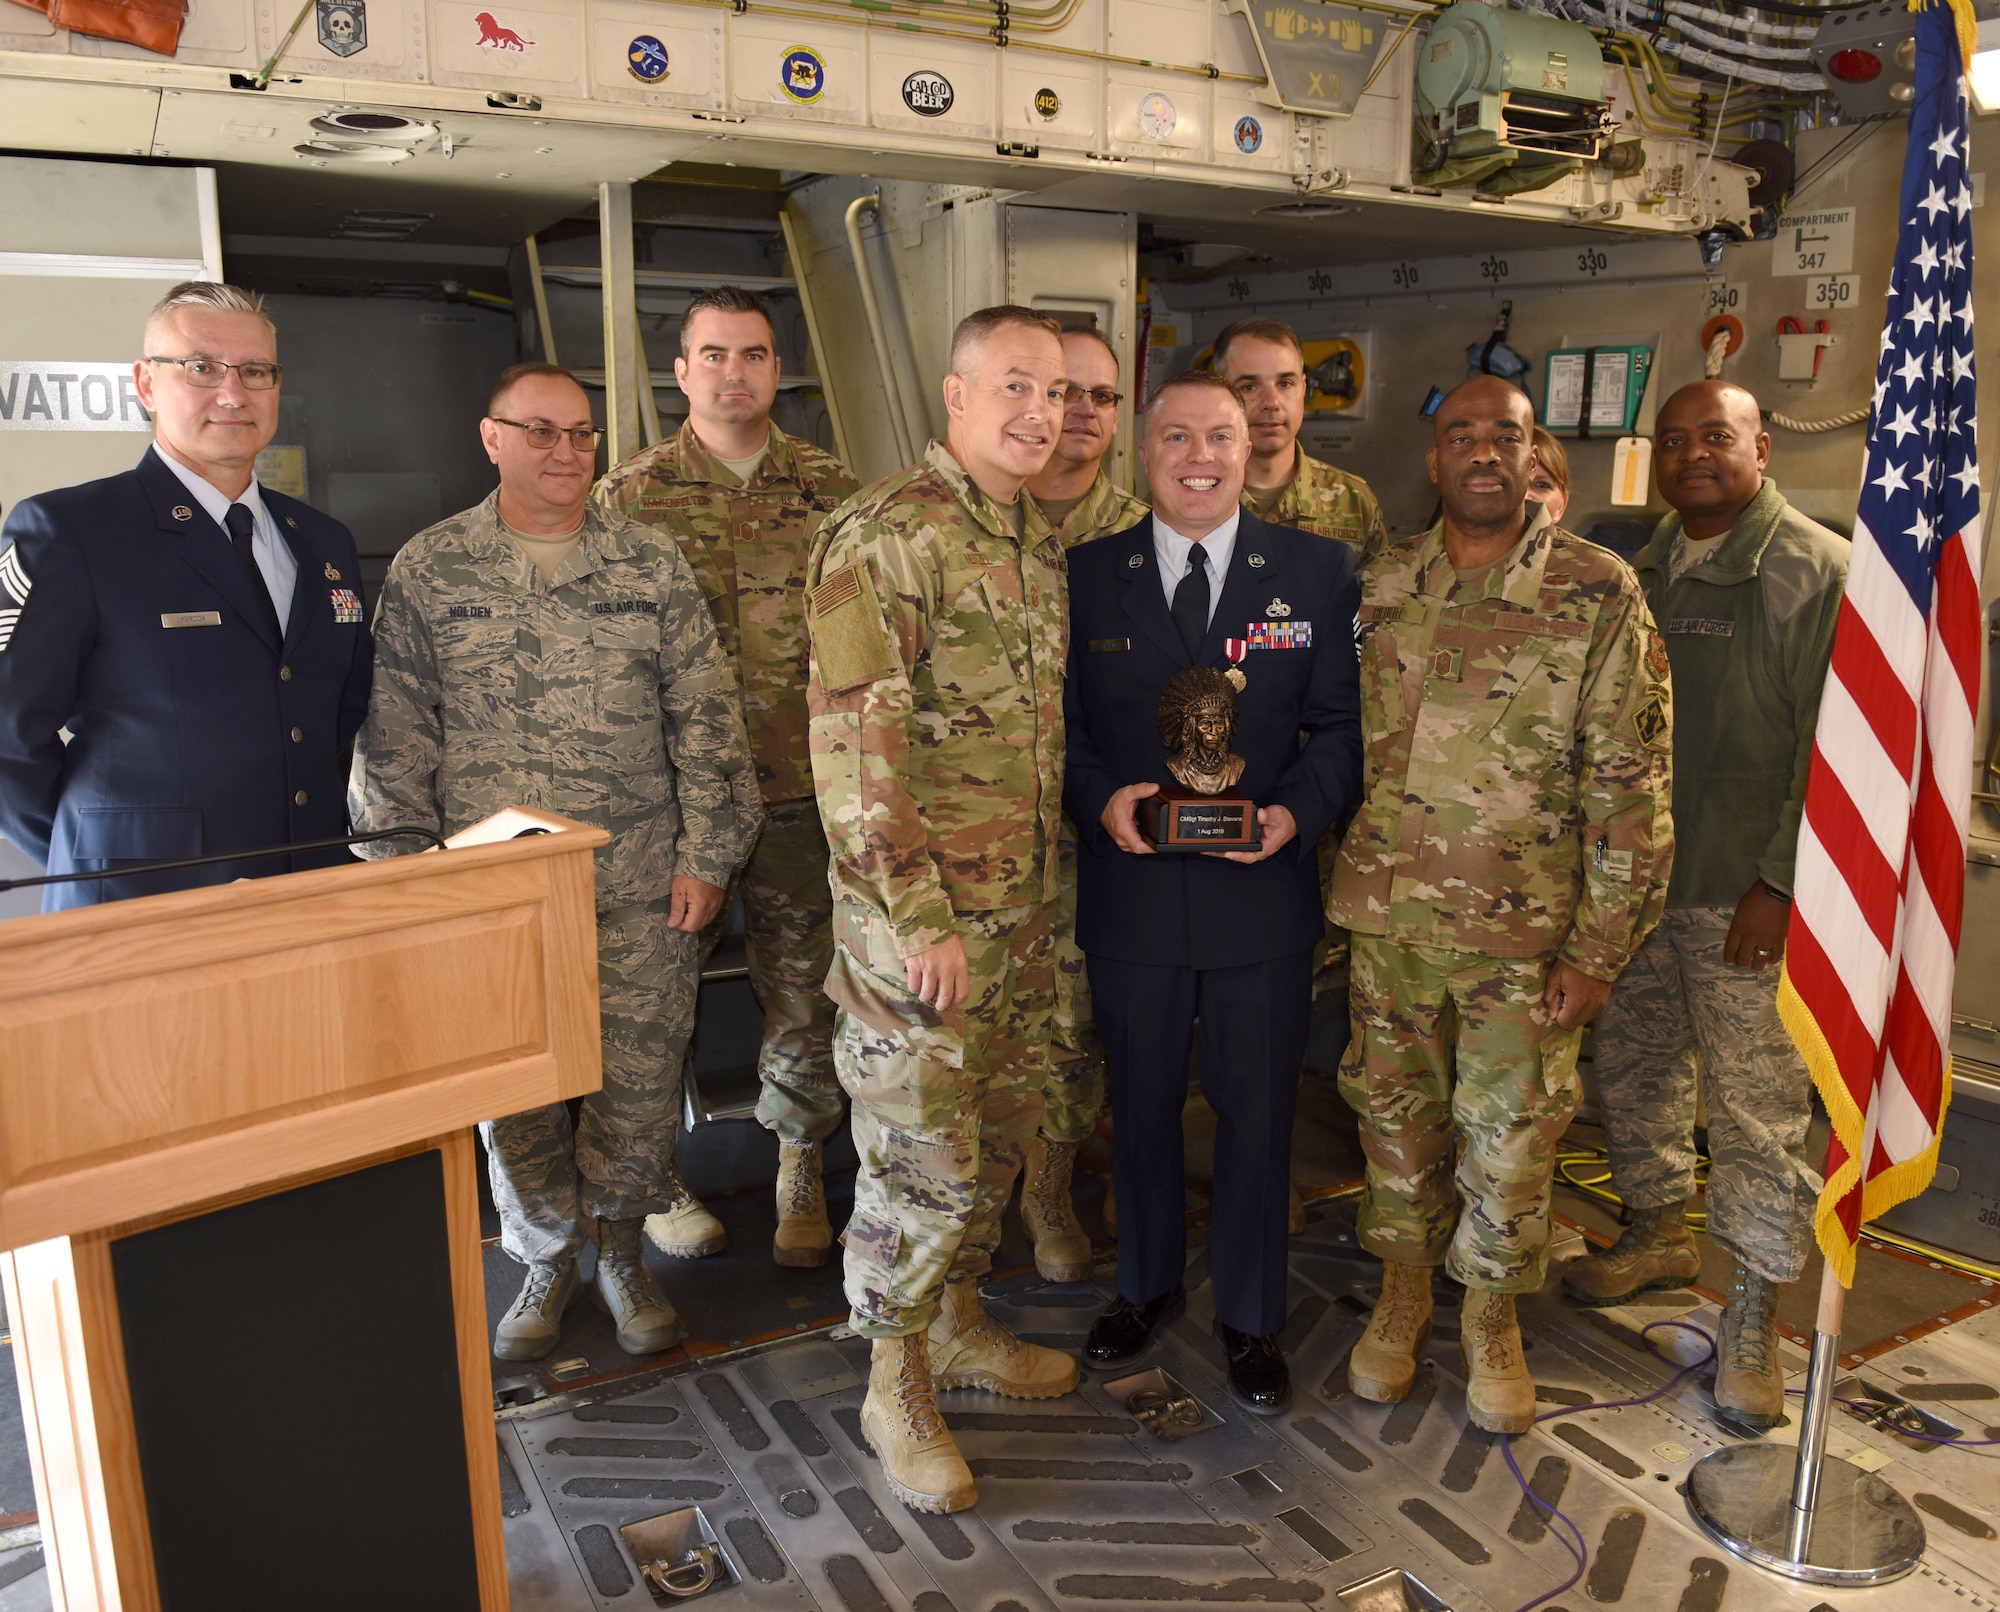 Chief Master Sgt. Timothy J. Stevens of the 911th Maintenance Group receives the Chiefs’ Bust presented to him by 911th Airlift Wing Command Chief Master Sgt. Christopher D. Neitzel on behalf of the 911th AW Chiefs' Council during a chief’s induction ceremony at the Pittsburgh International Airport Air Reserve Station, Pennsylvania, Oct. 5, 2019.